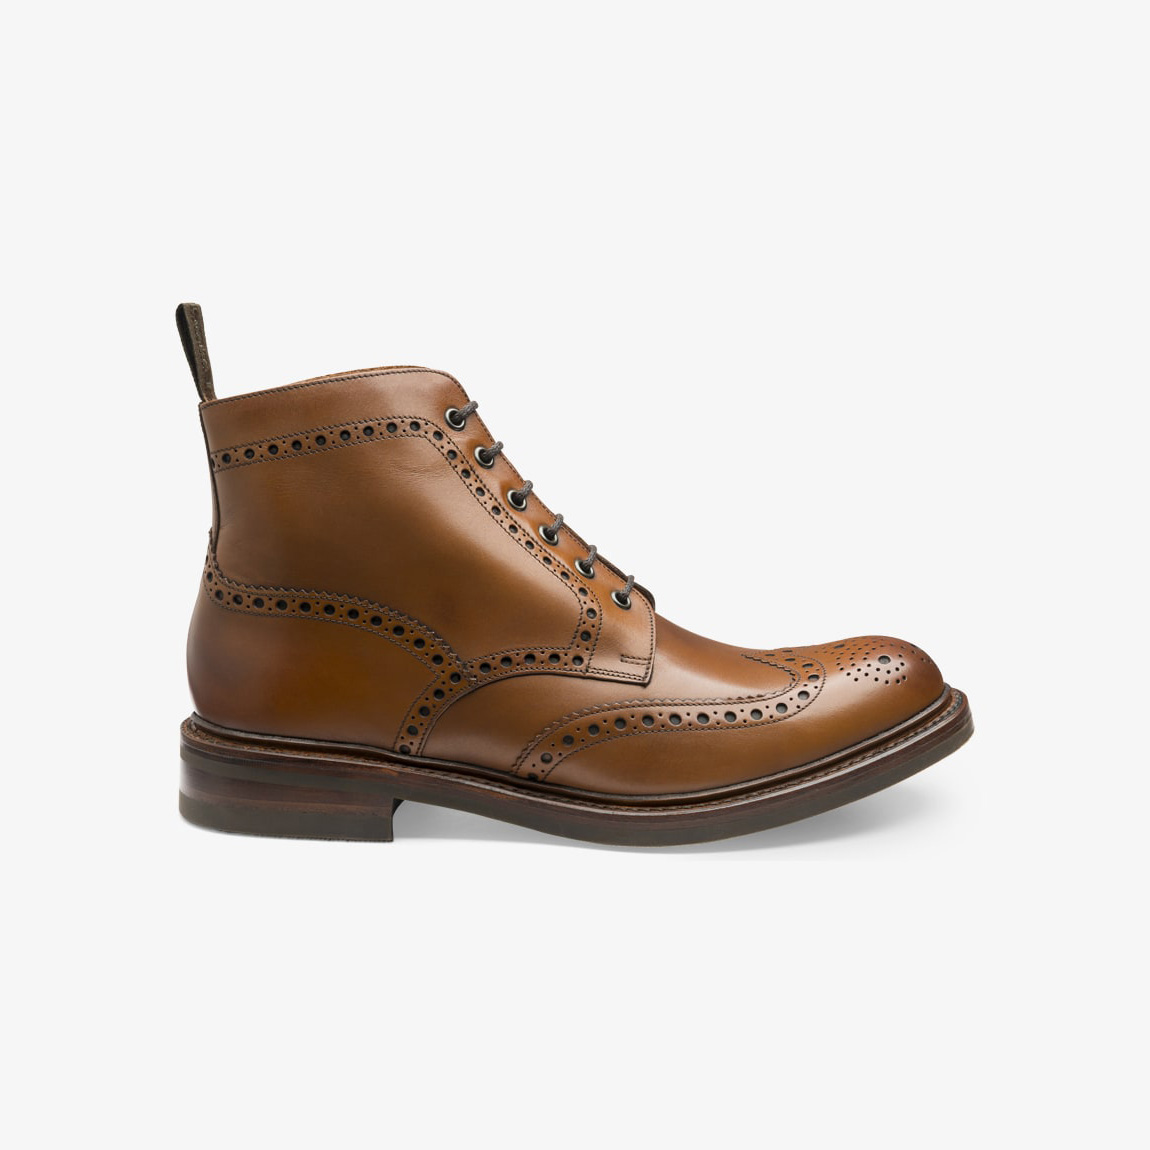 Loake Bedale Brown Brogue Derby Boot